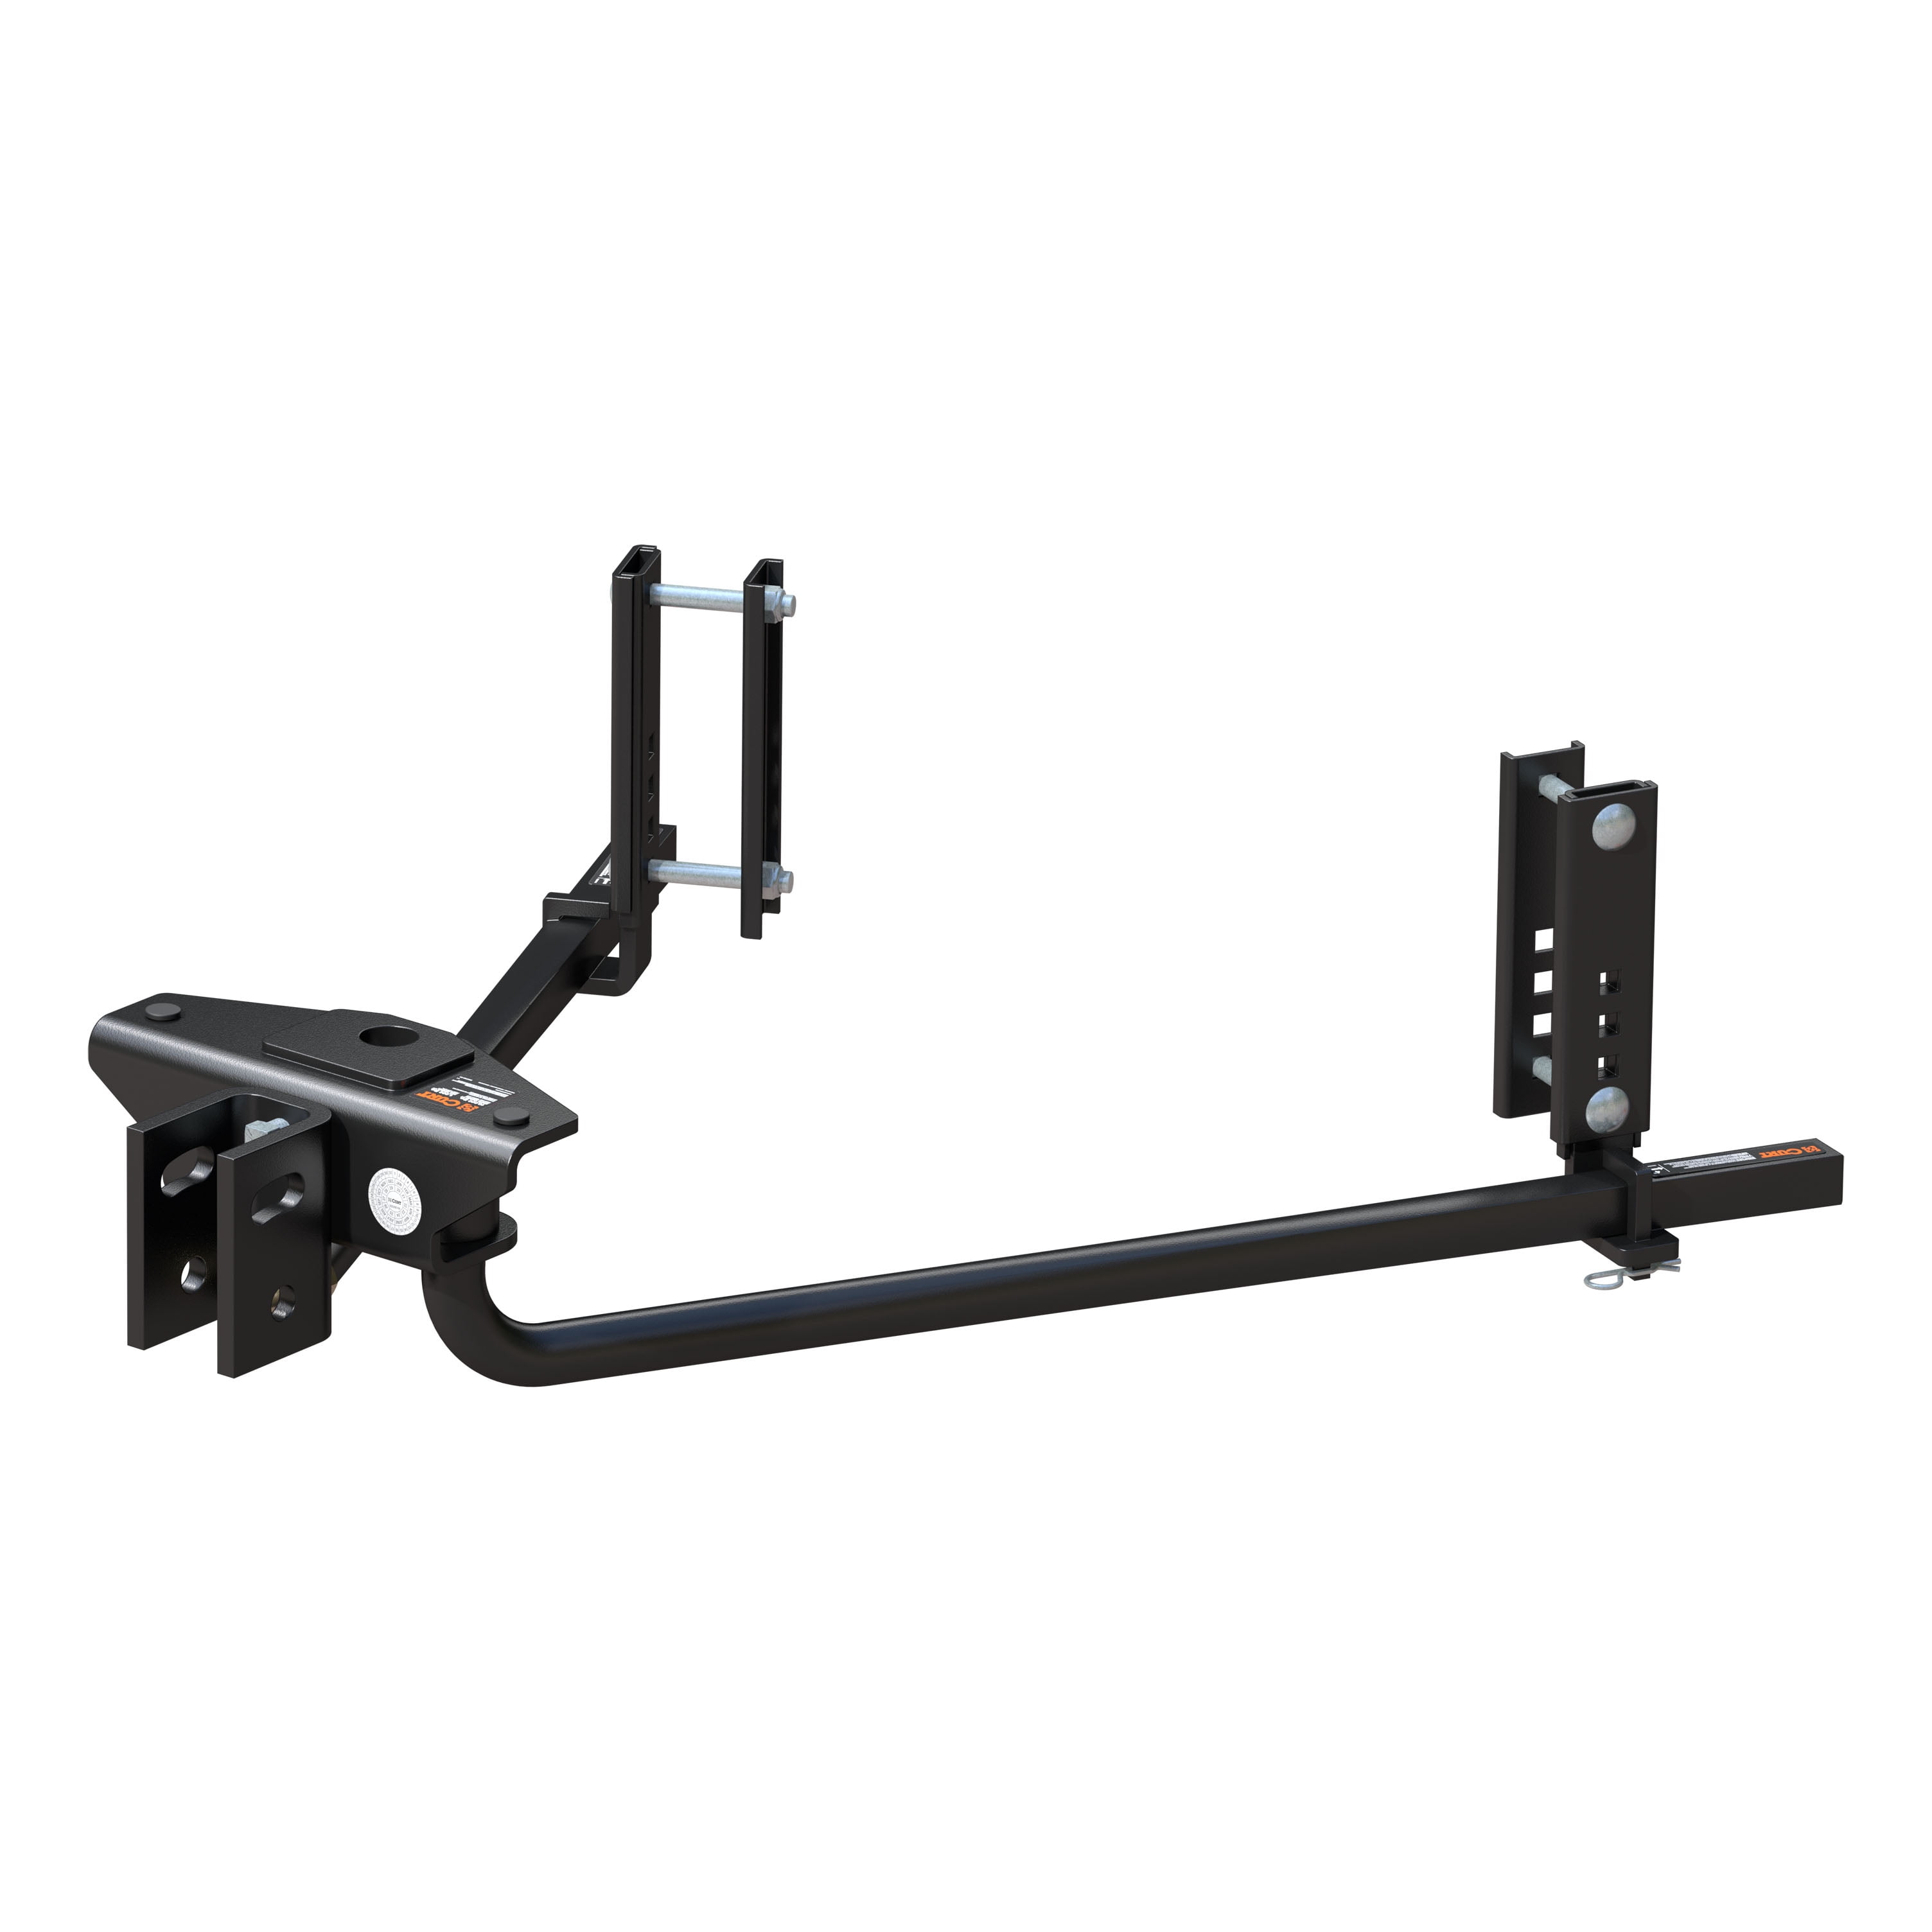 Up to 10K CURT 17600 TruTrack 2P Weight Distribution Hitch with 2X Sway Control No Shank or Ball 